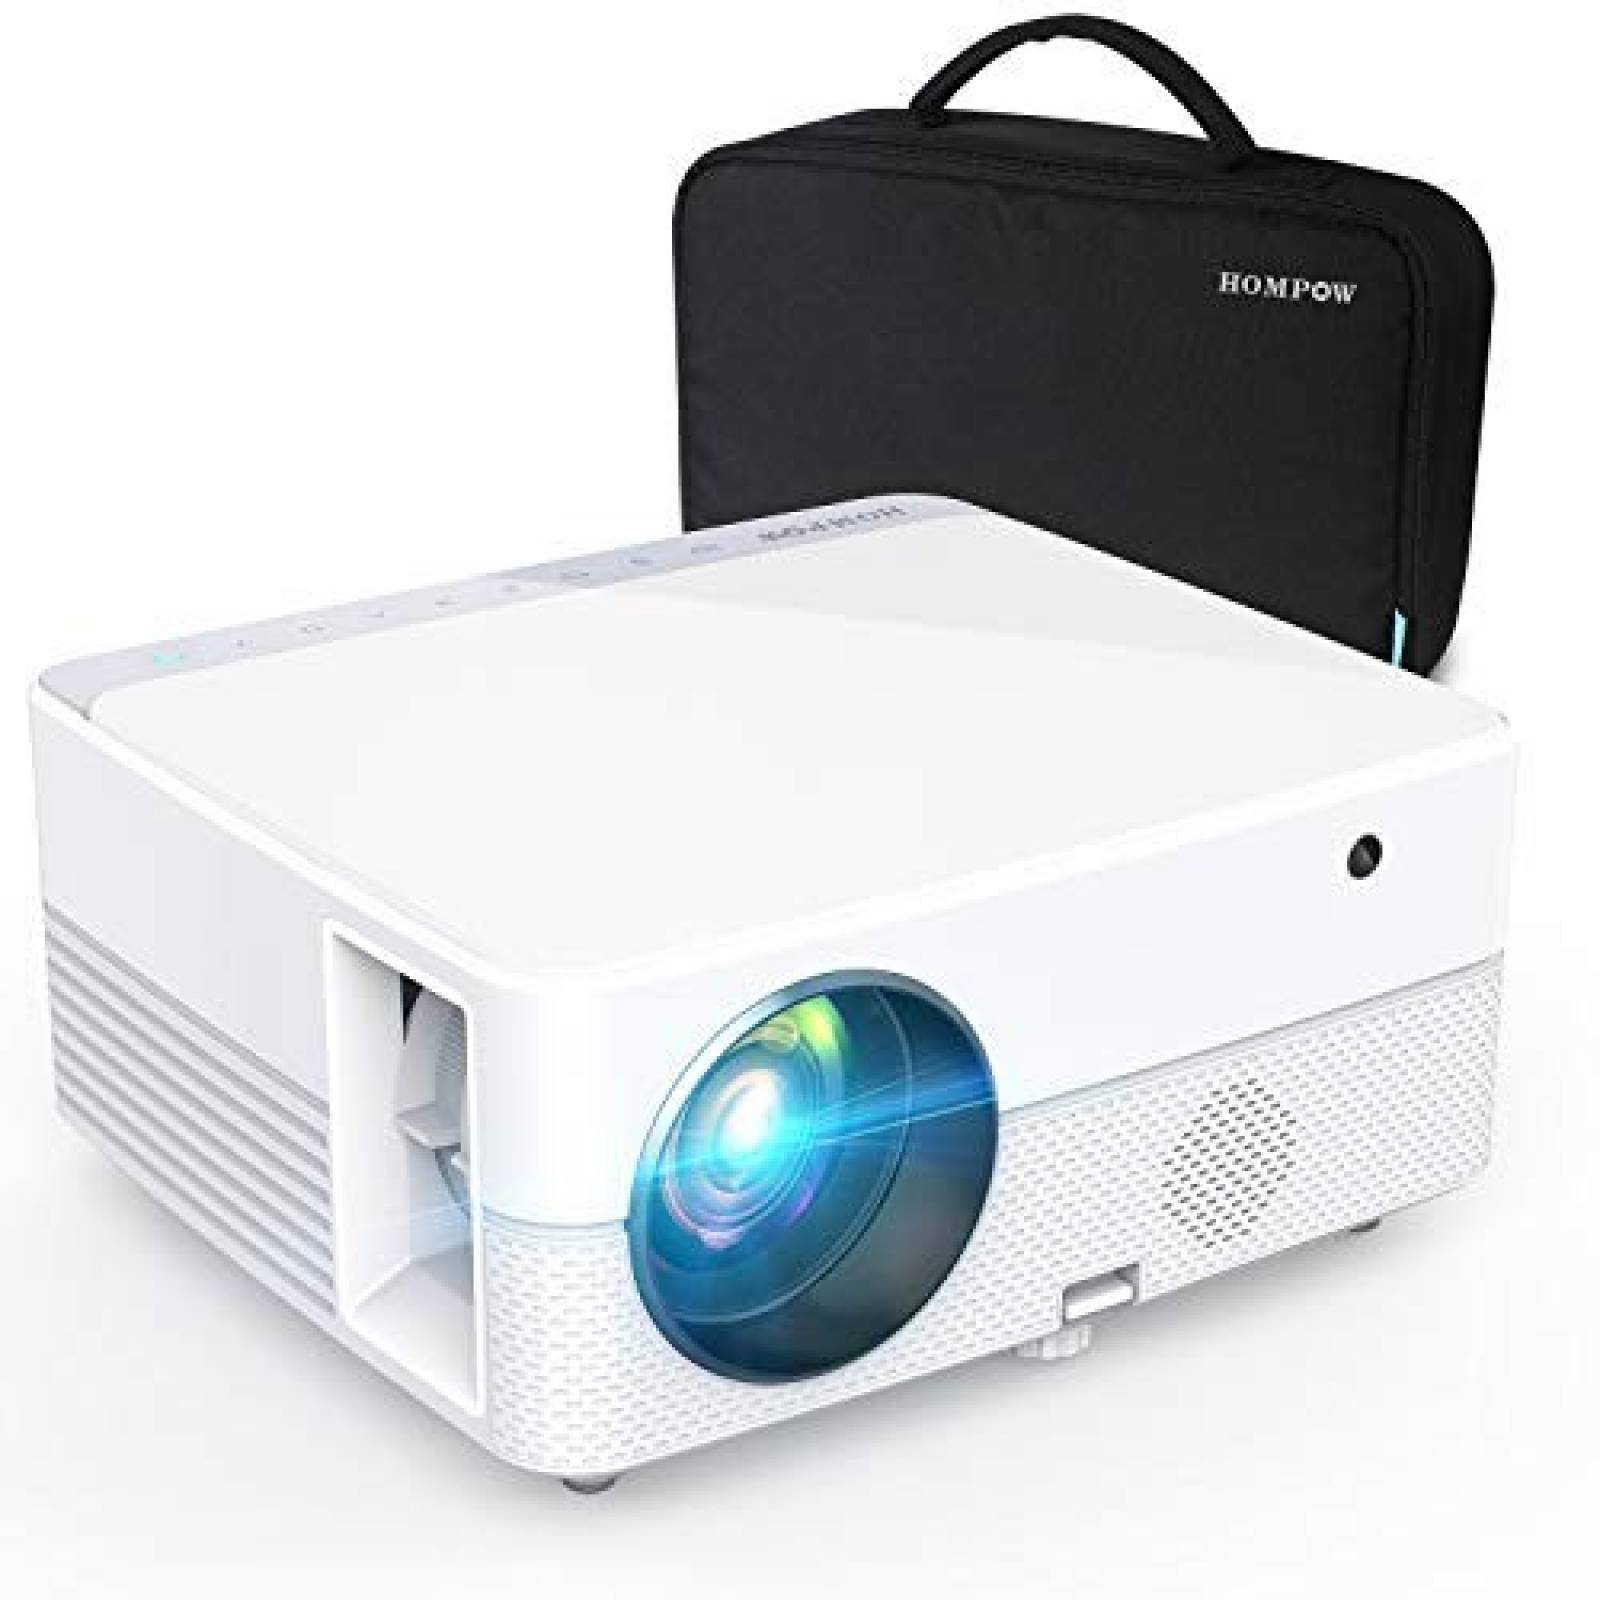 Videoproyector Hompow 4500 lux Full HD 1080p -Blanco